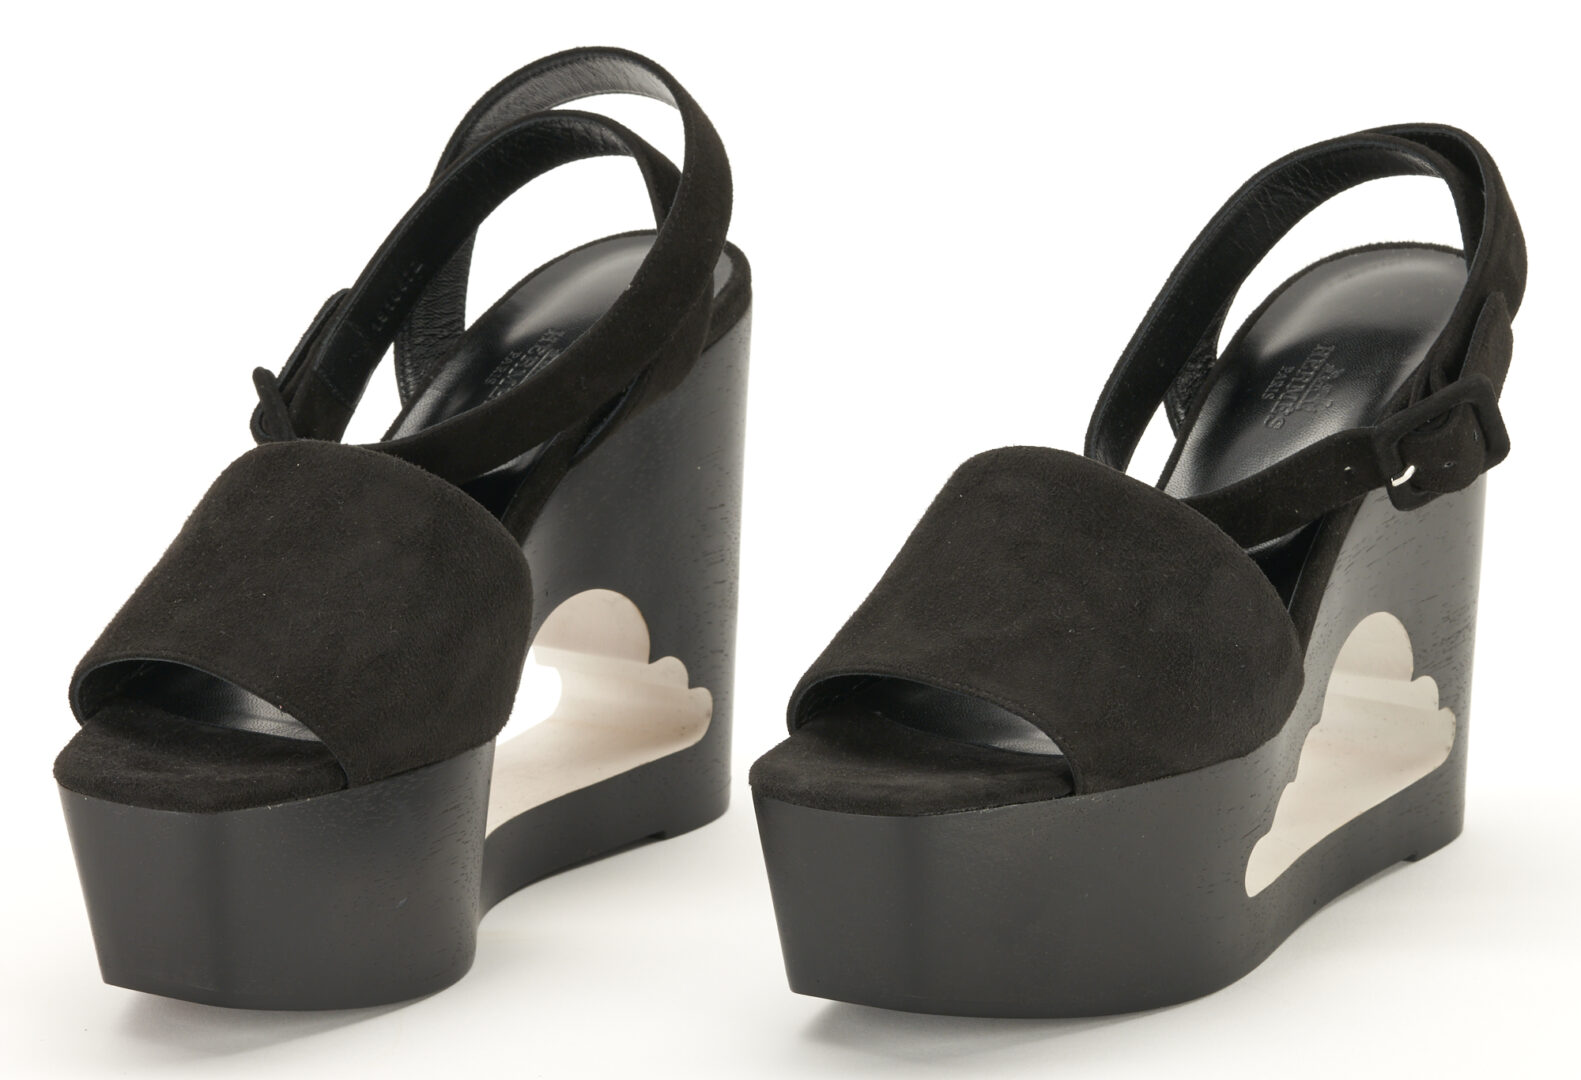 Lot 91: 2 Pairs Limited Edition Hermes Heels, incl. Cloud Sandal